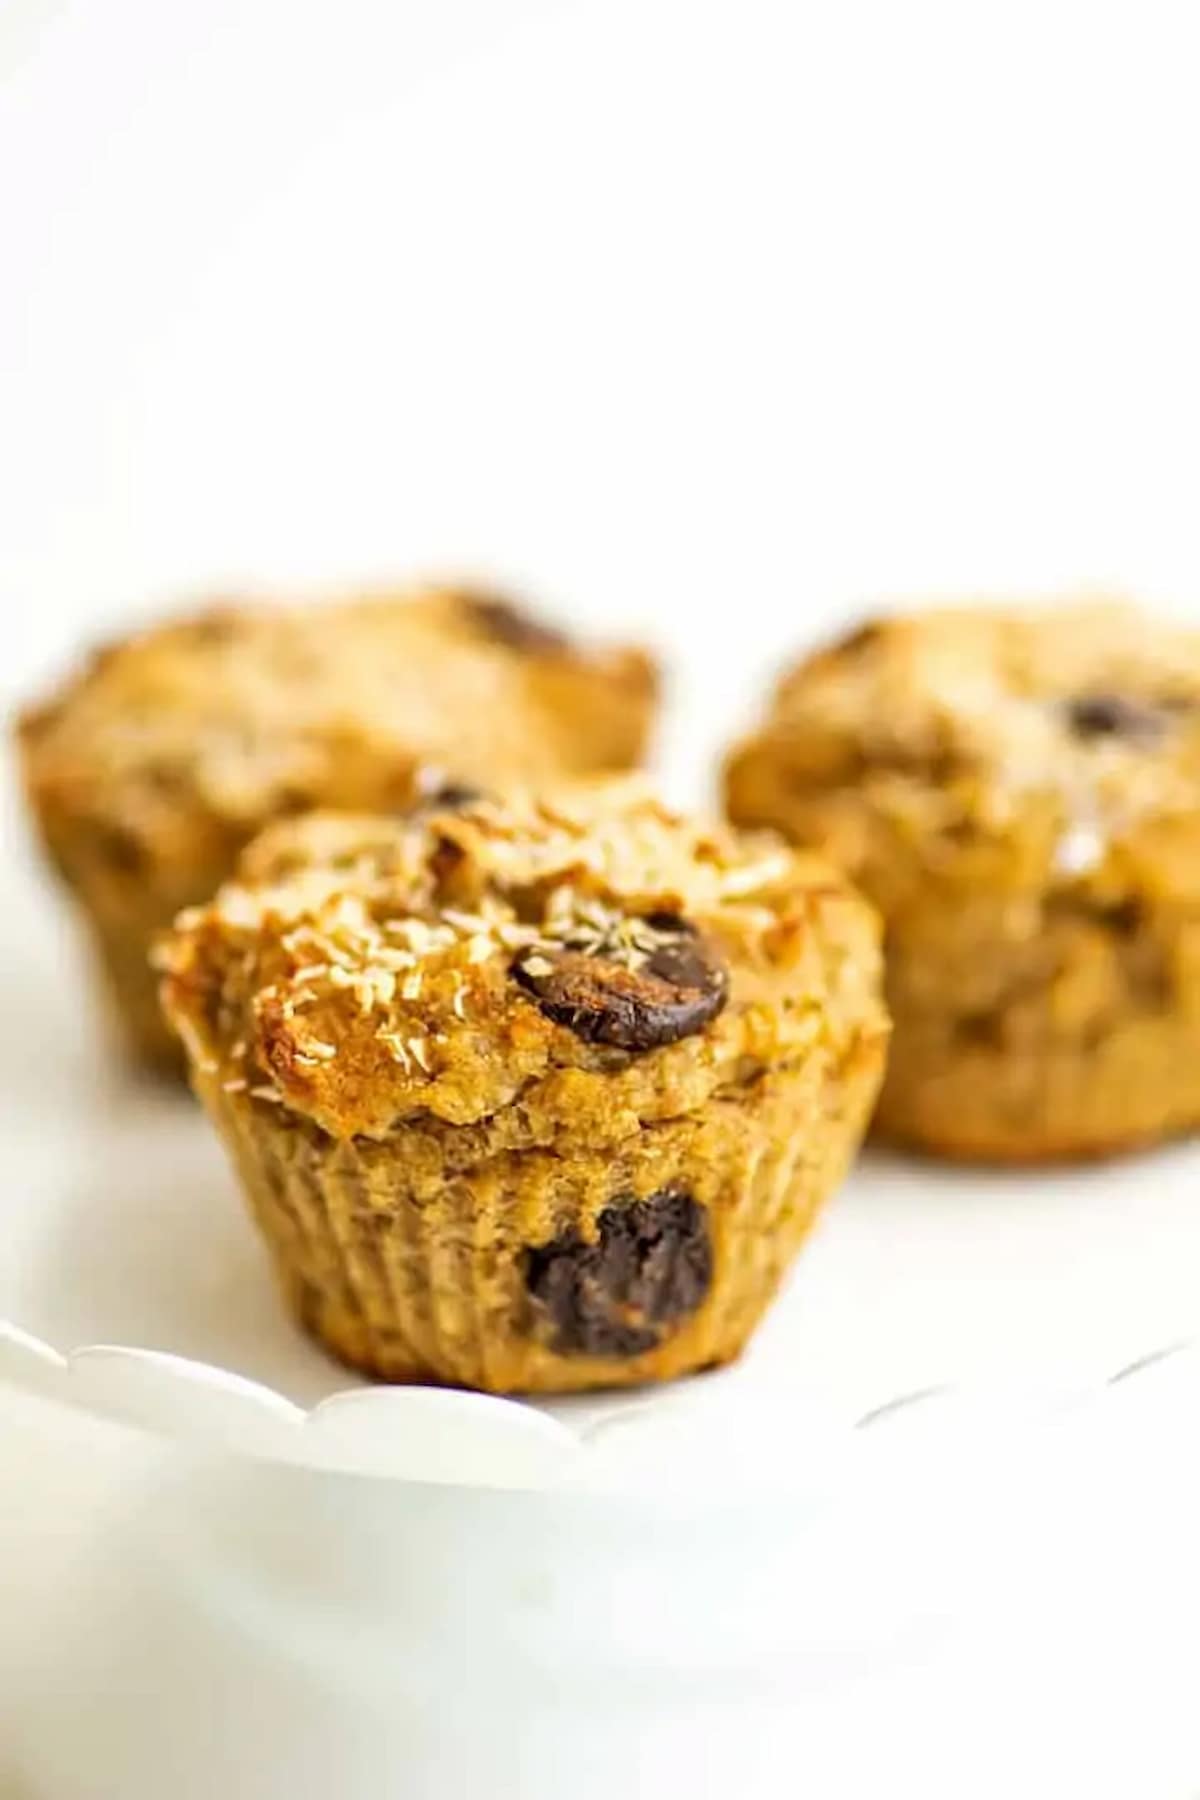 Quinoa banana muffins topped with shredded coconut.